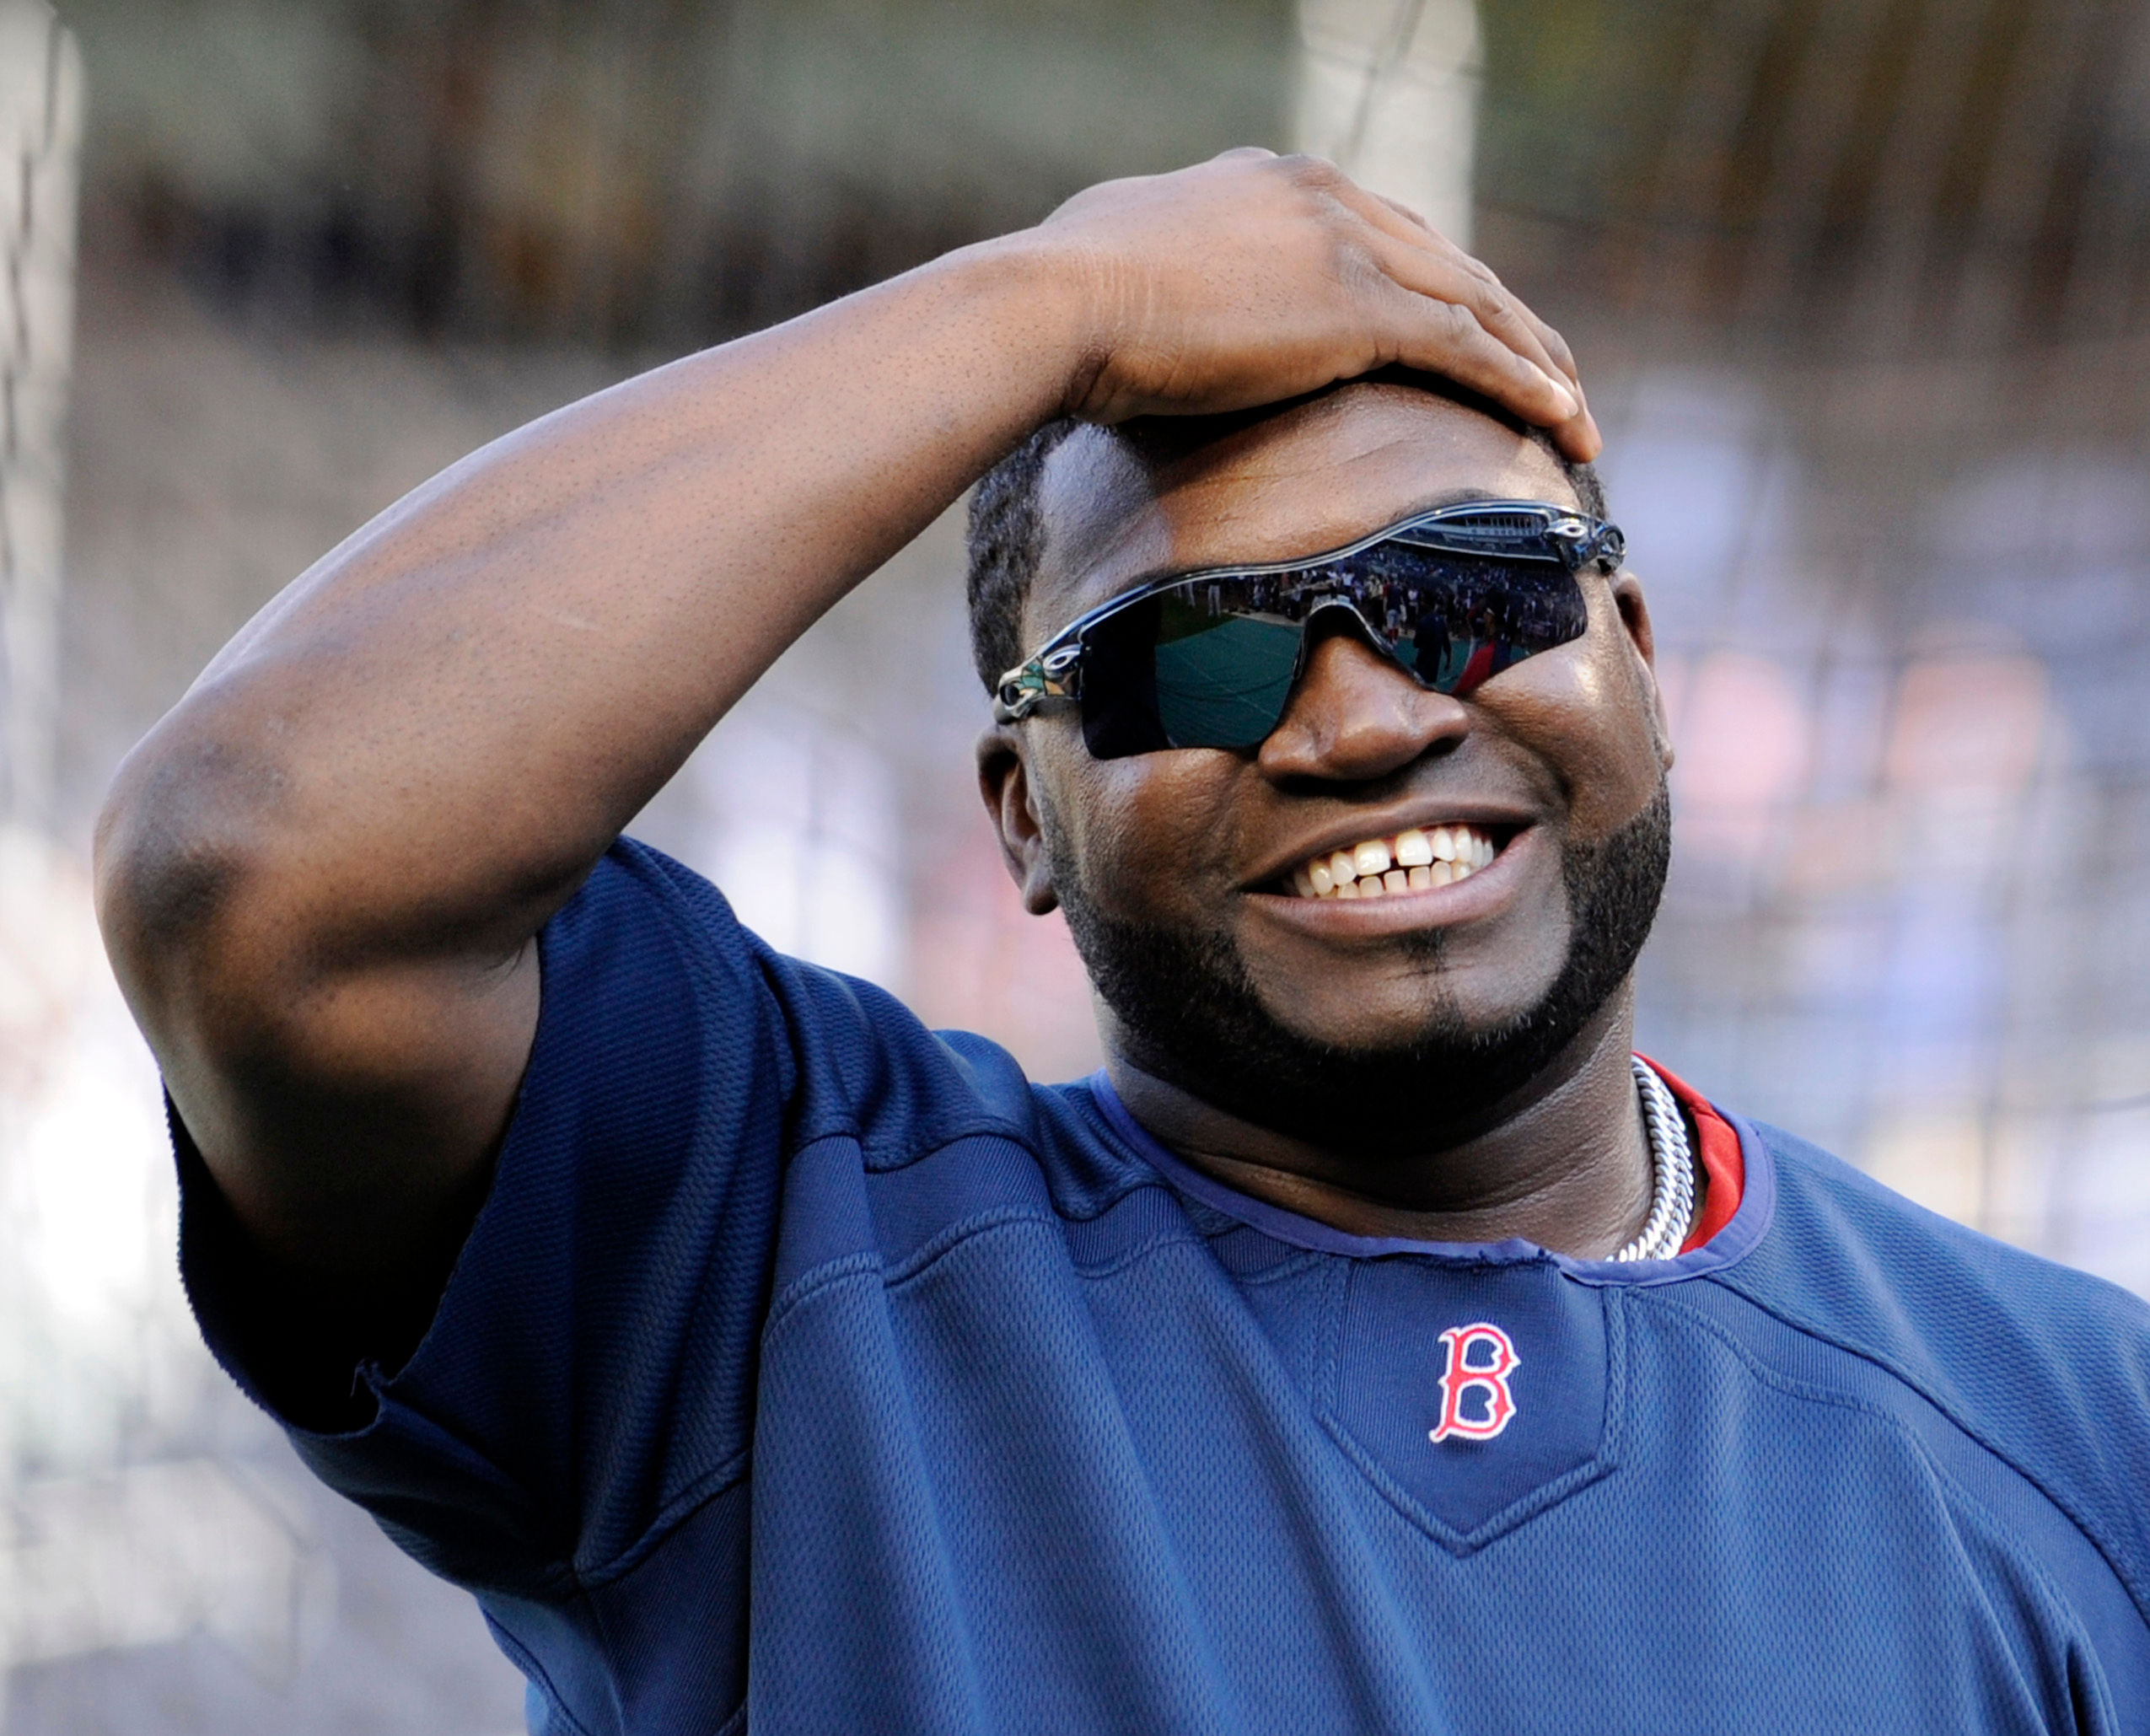 David Ortiz agent, net worth, nationality and other details